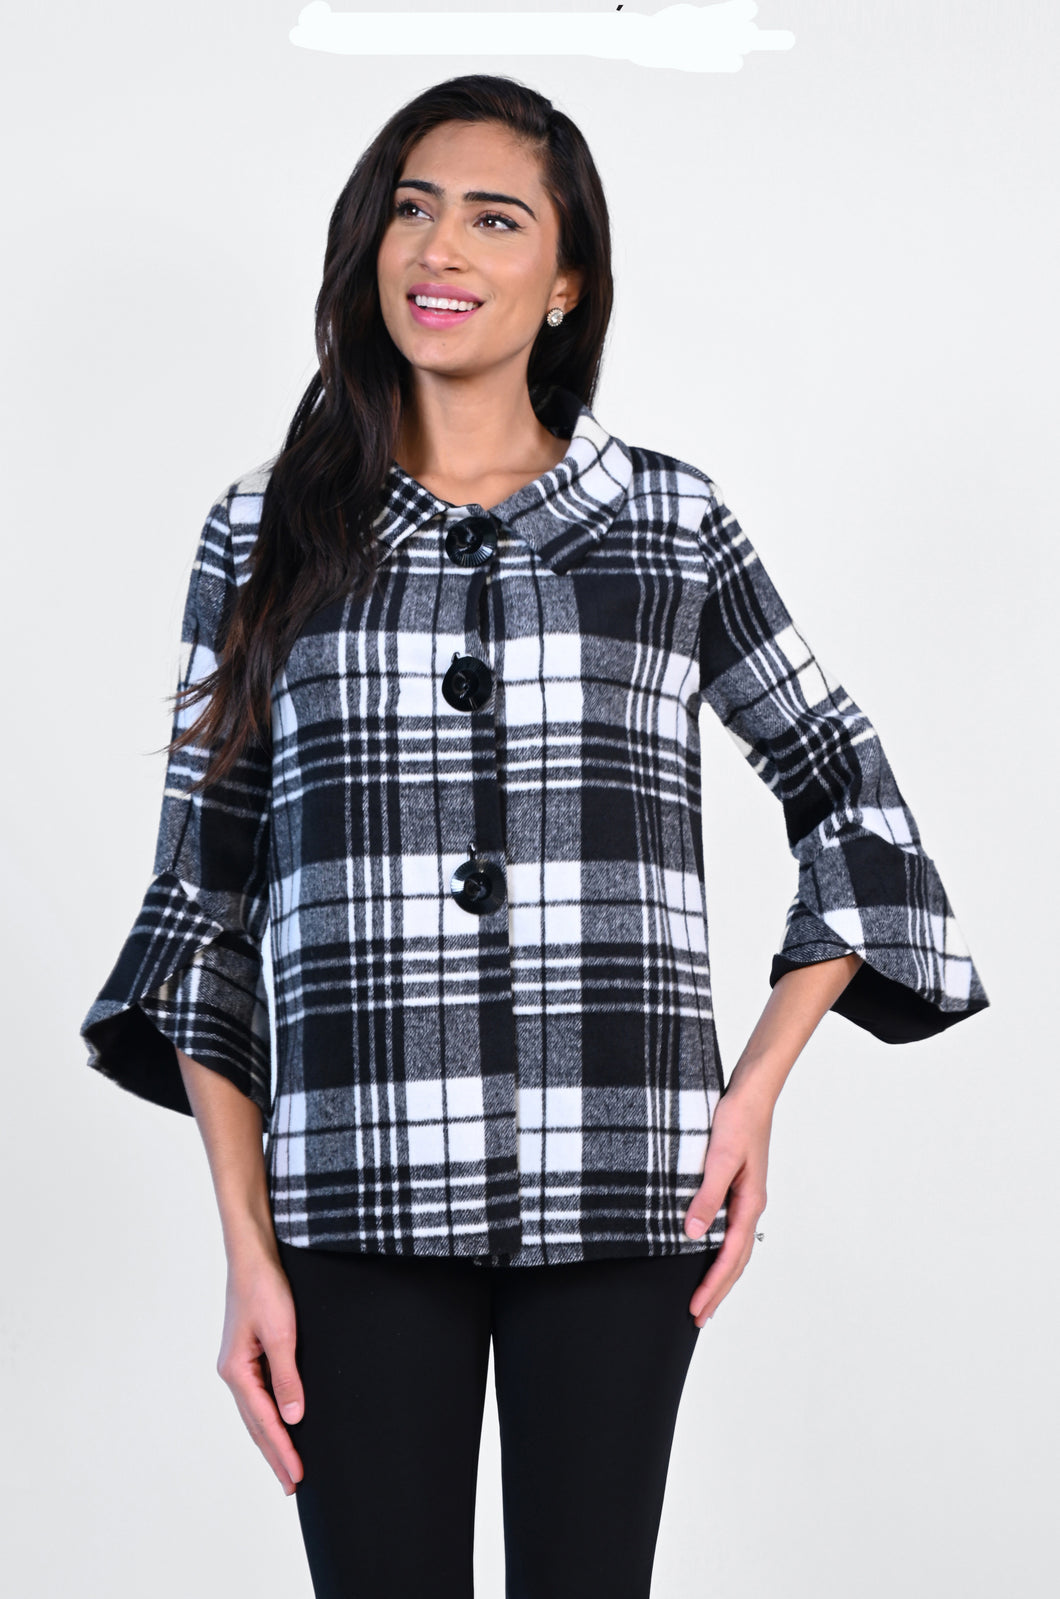 Black and white plaid jacket   100% polyester